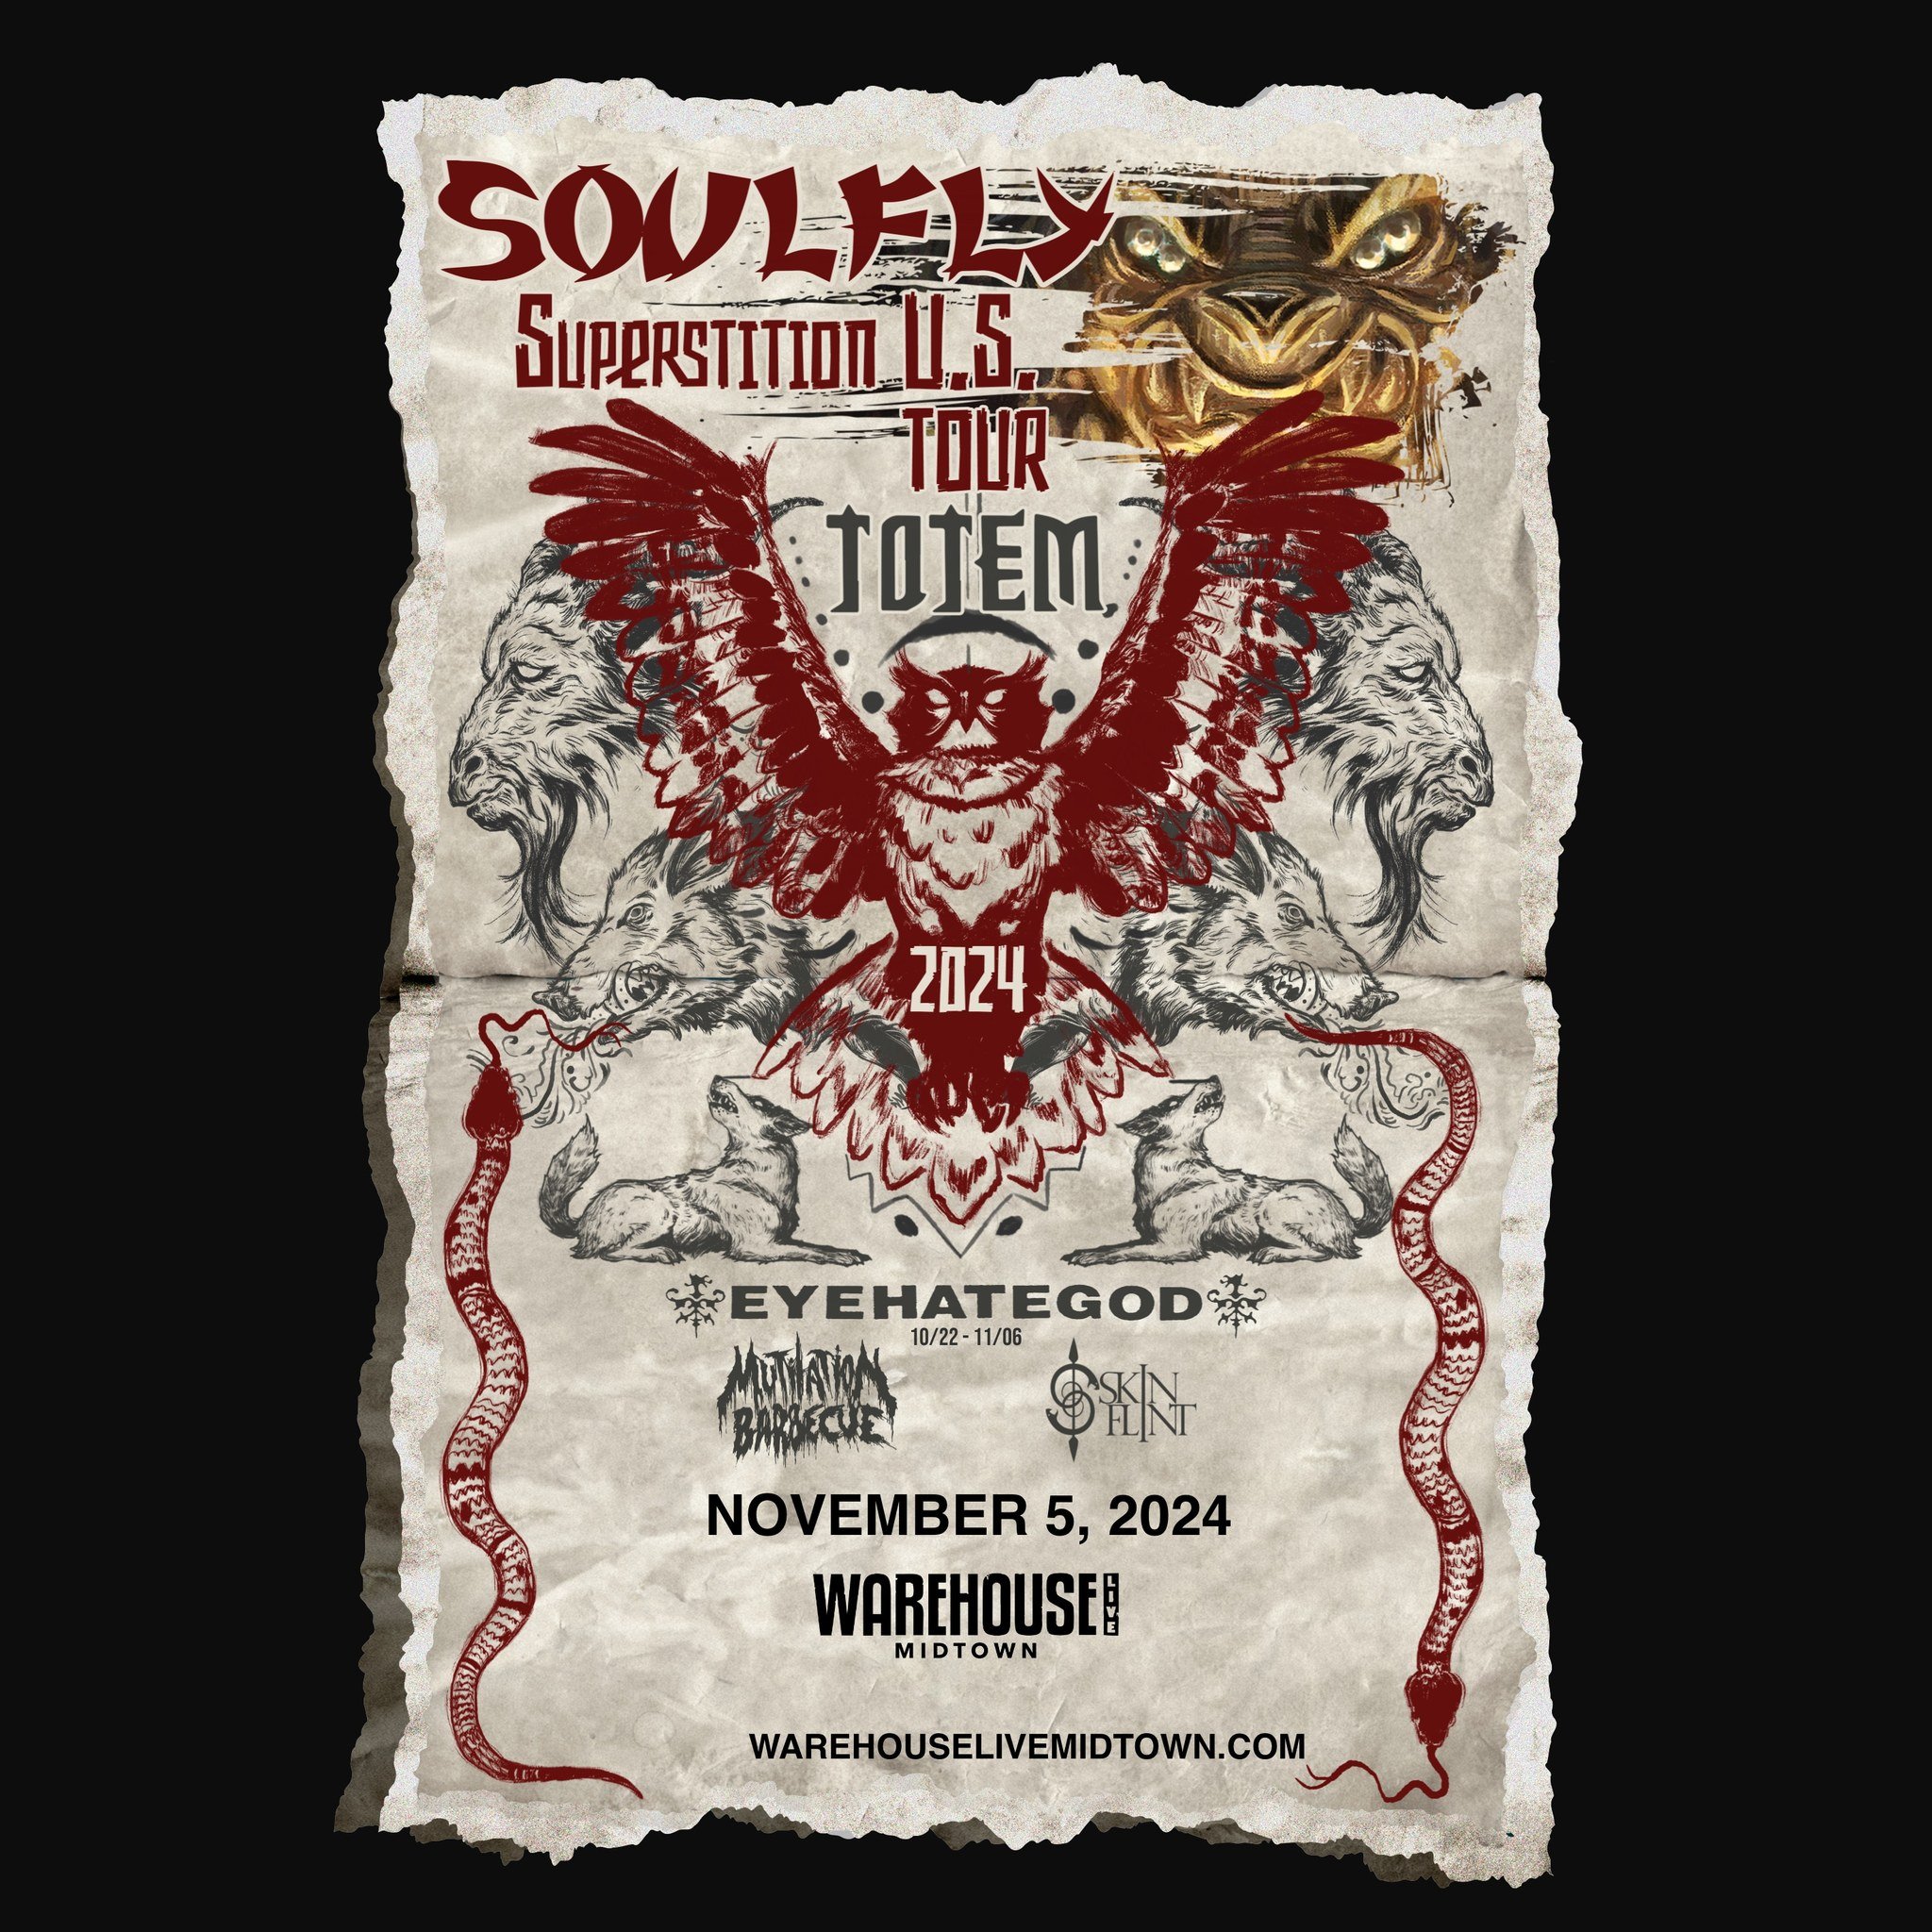 🎸 Soulfly Superstition US Tour coming to Houston on November 5, 2024, with Eyehategod, Mutilation Barbecue, and Skin Flint.  Tickets go on sale Friday 5/31 at 10am. For more information go to warehouselivemidtown.com
.
.

🎸 Soulfly Superstition US 